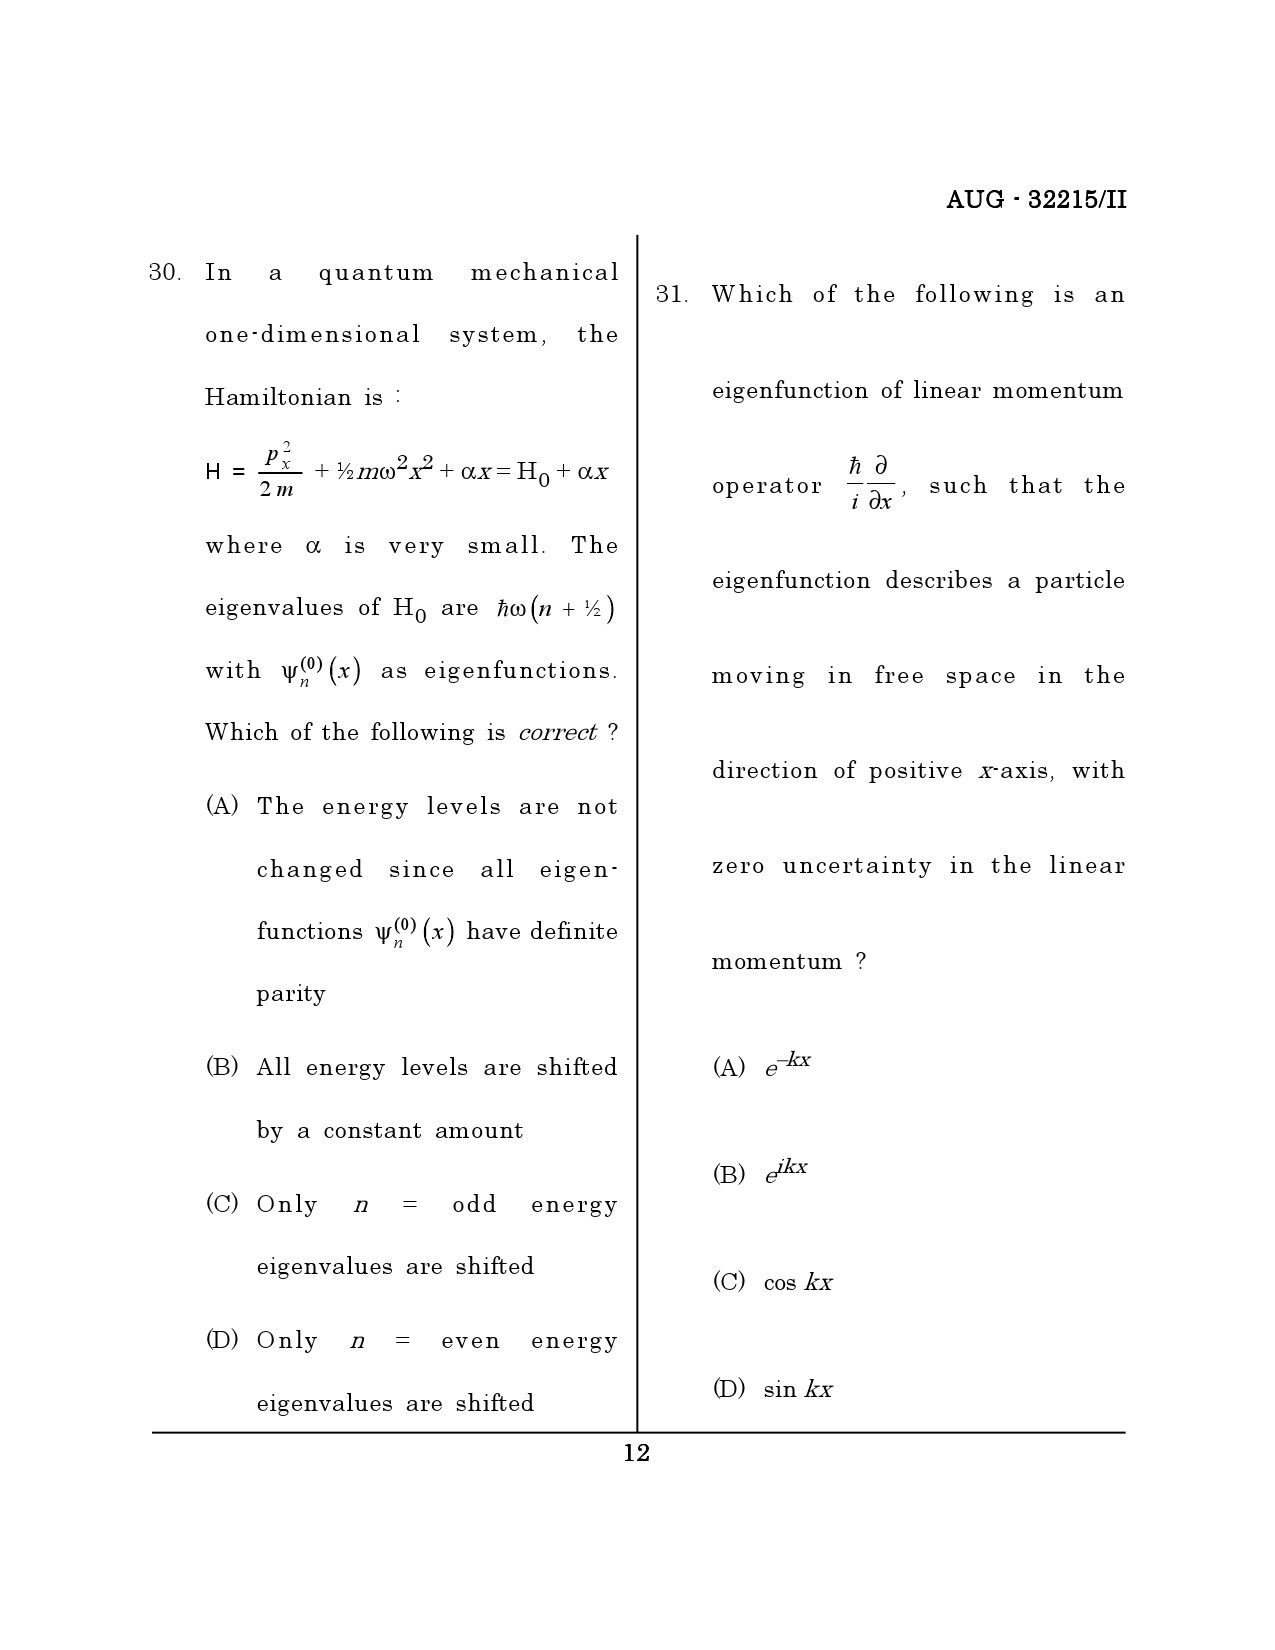 Maharashtra SET Physical Science Question Paper II August 2015 11